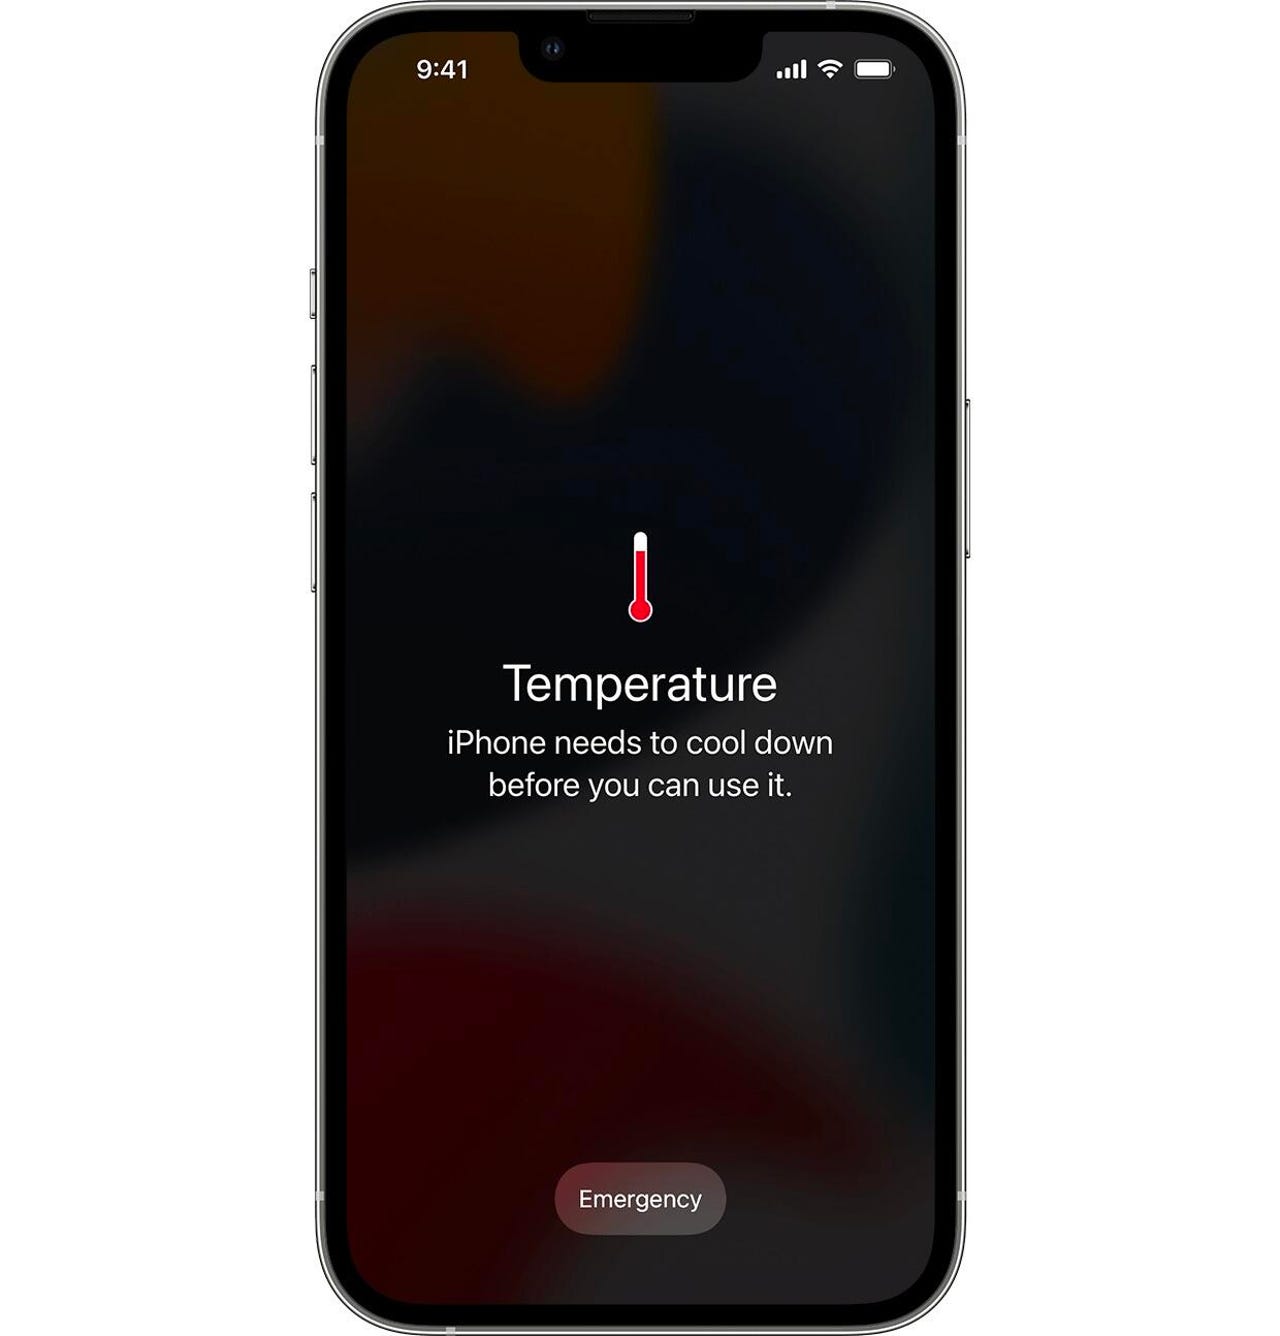 Can heat damage your iPhone?